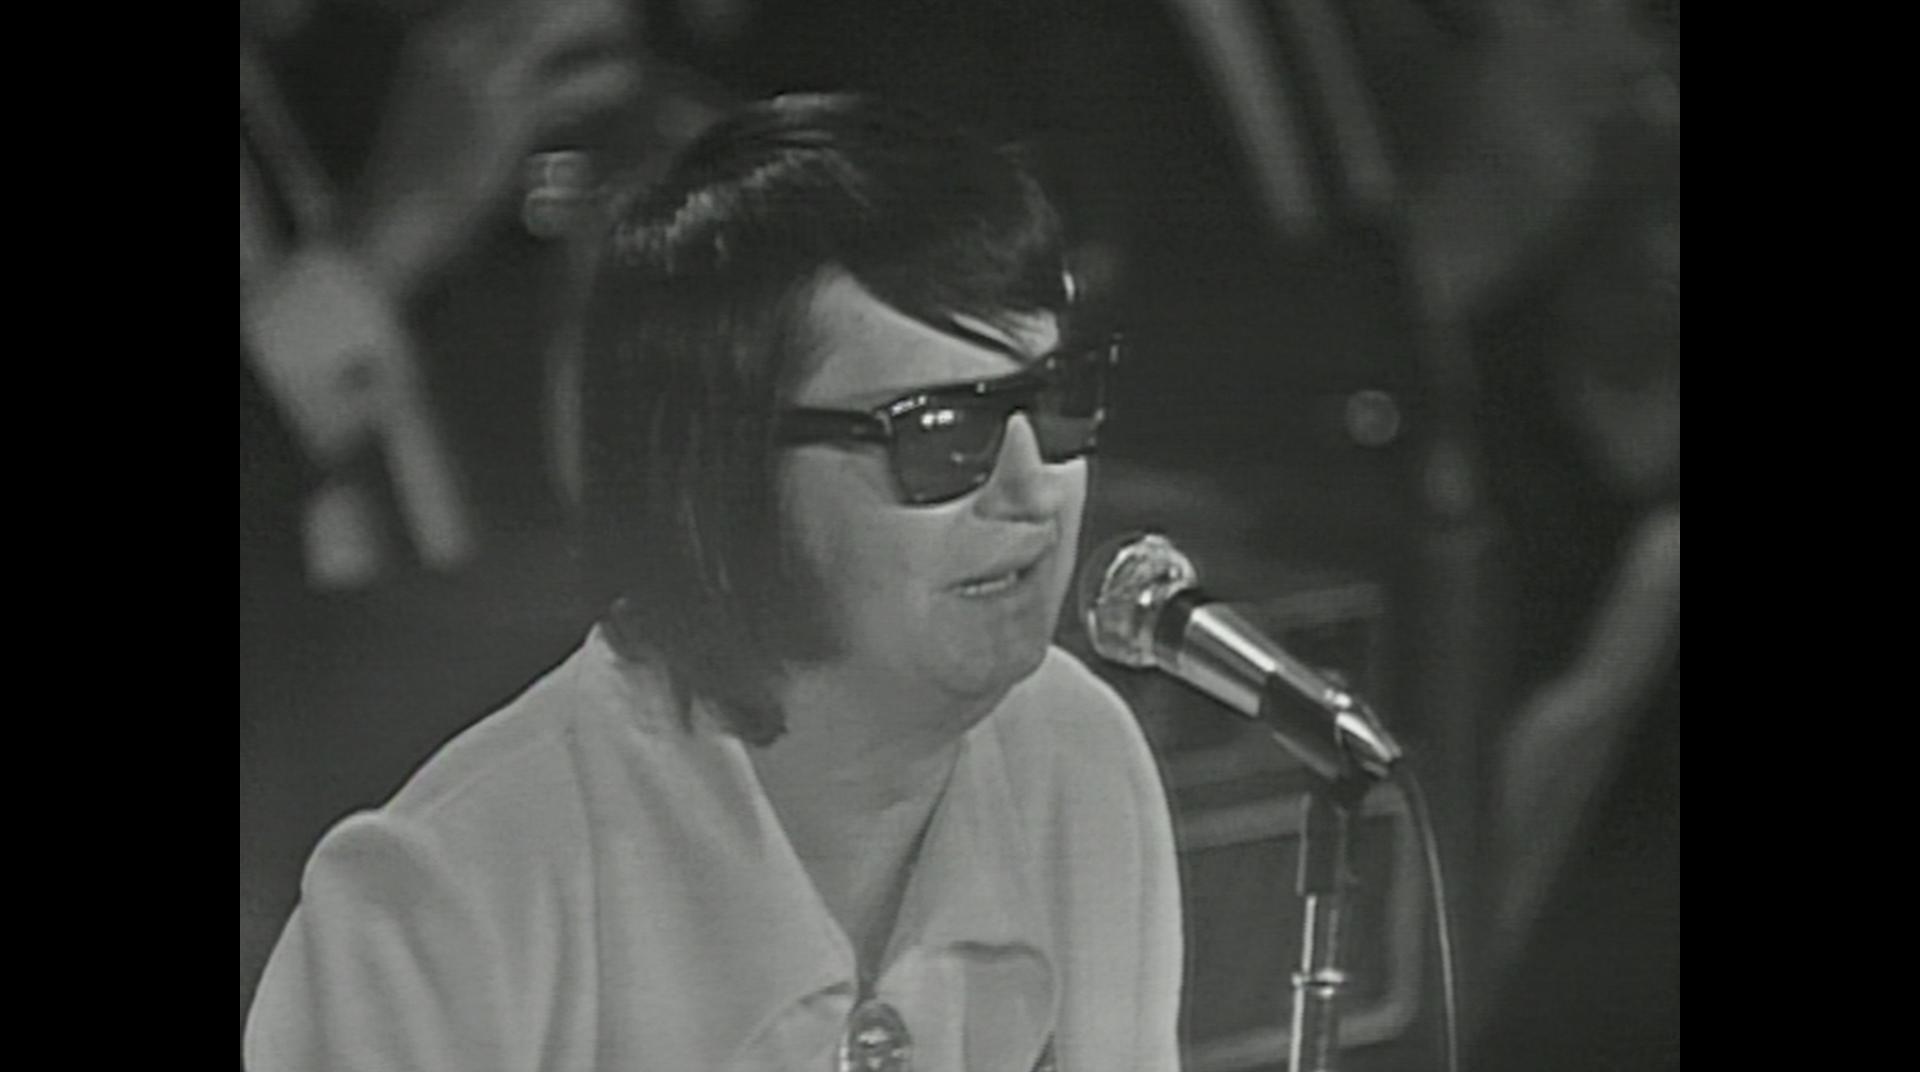 Roy Orbison - In Dreams (Live From Australia, 1972)